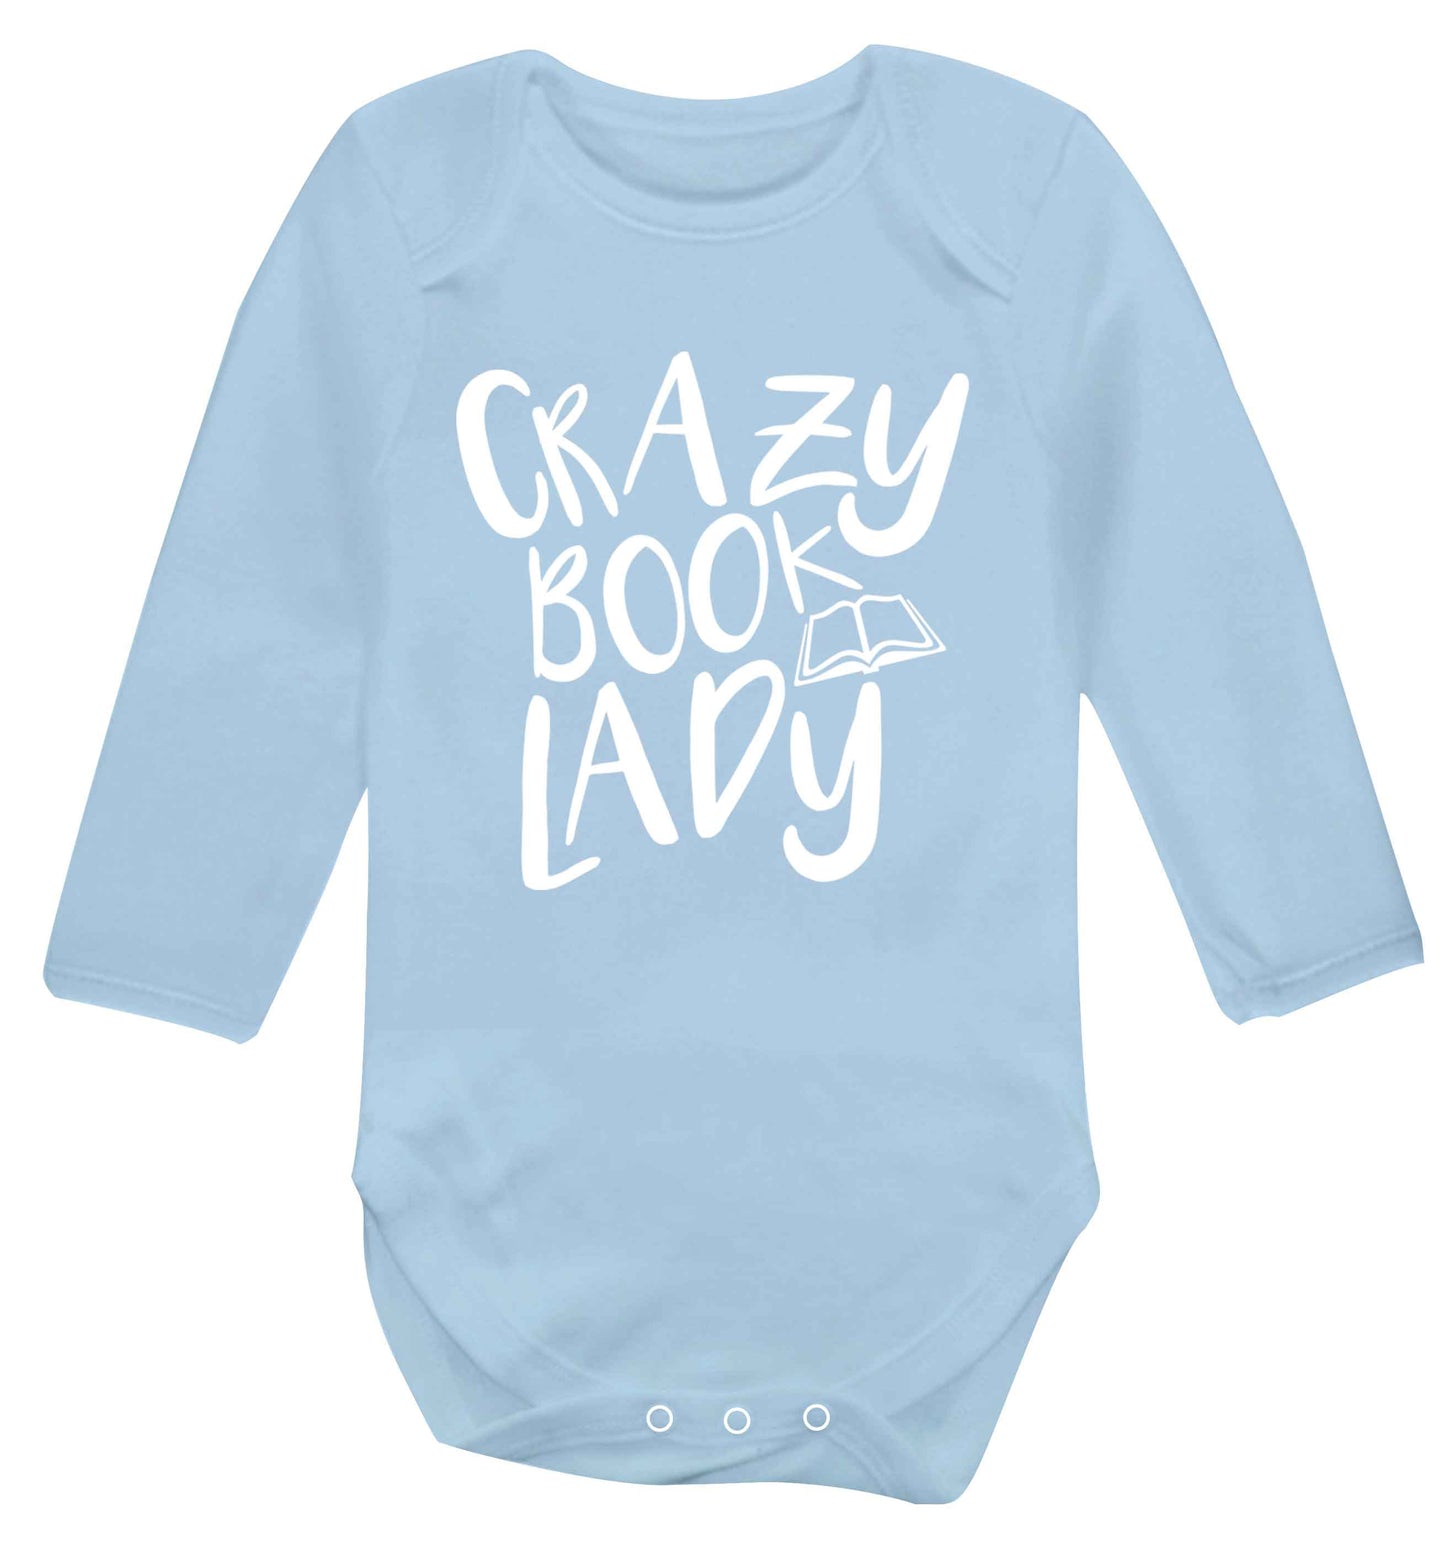 Crazy book lady Baby Vest long sleeved pale blue 6-12 months